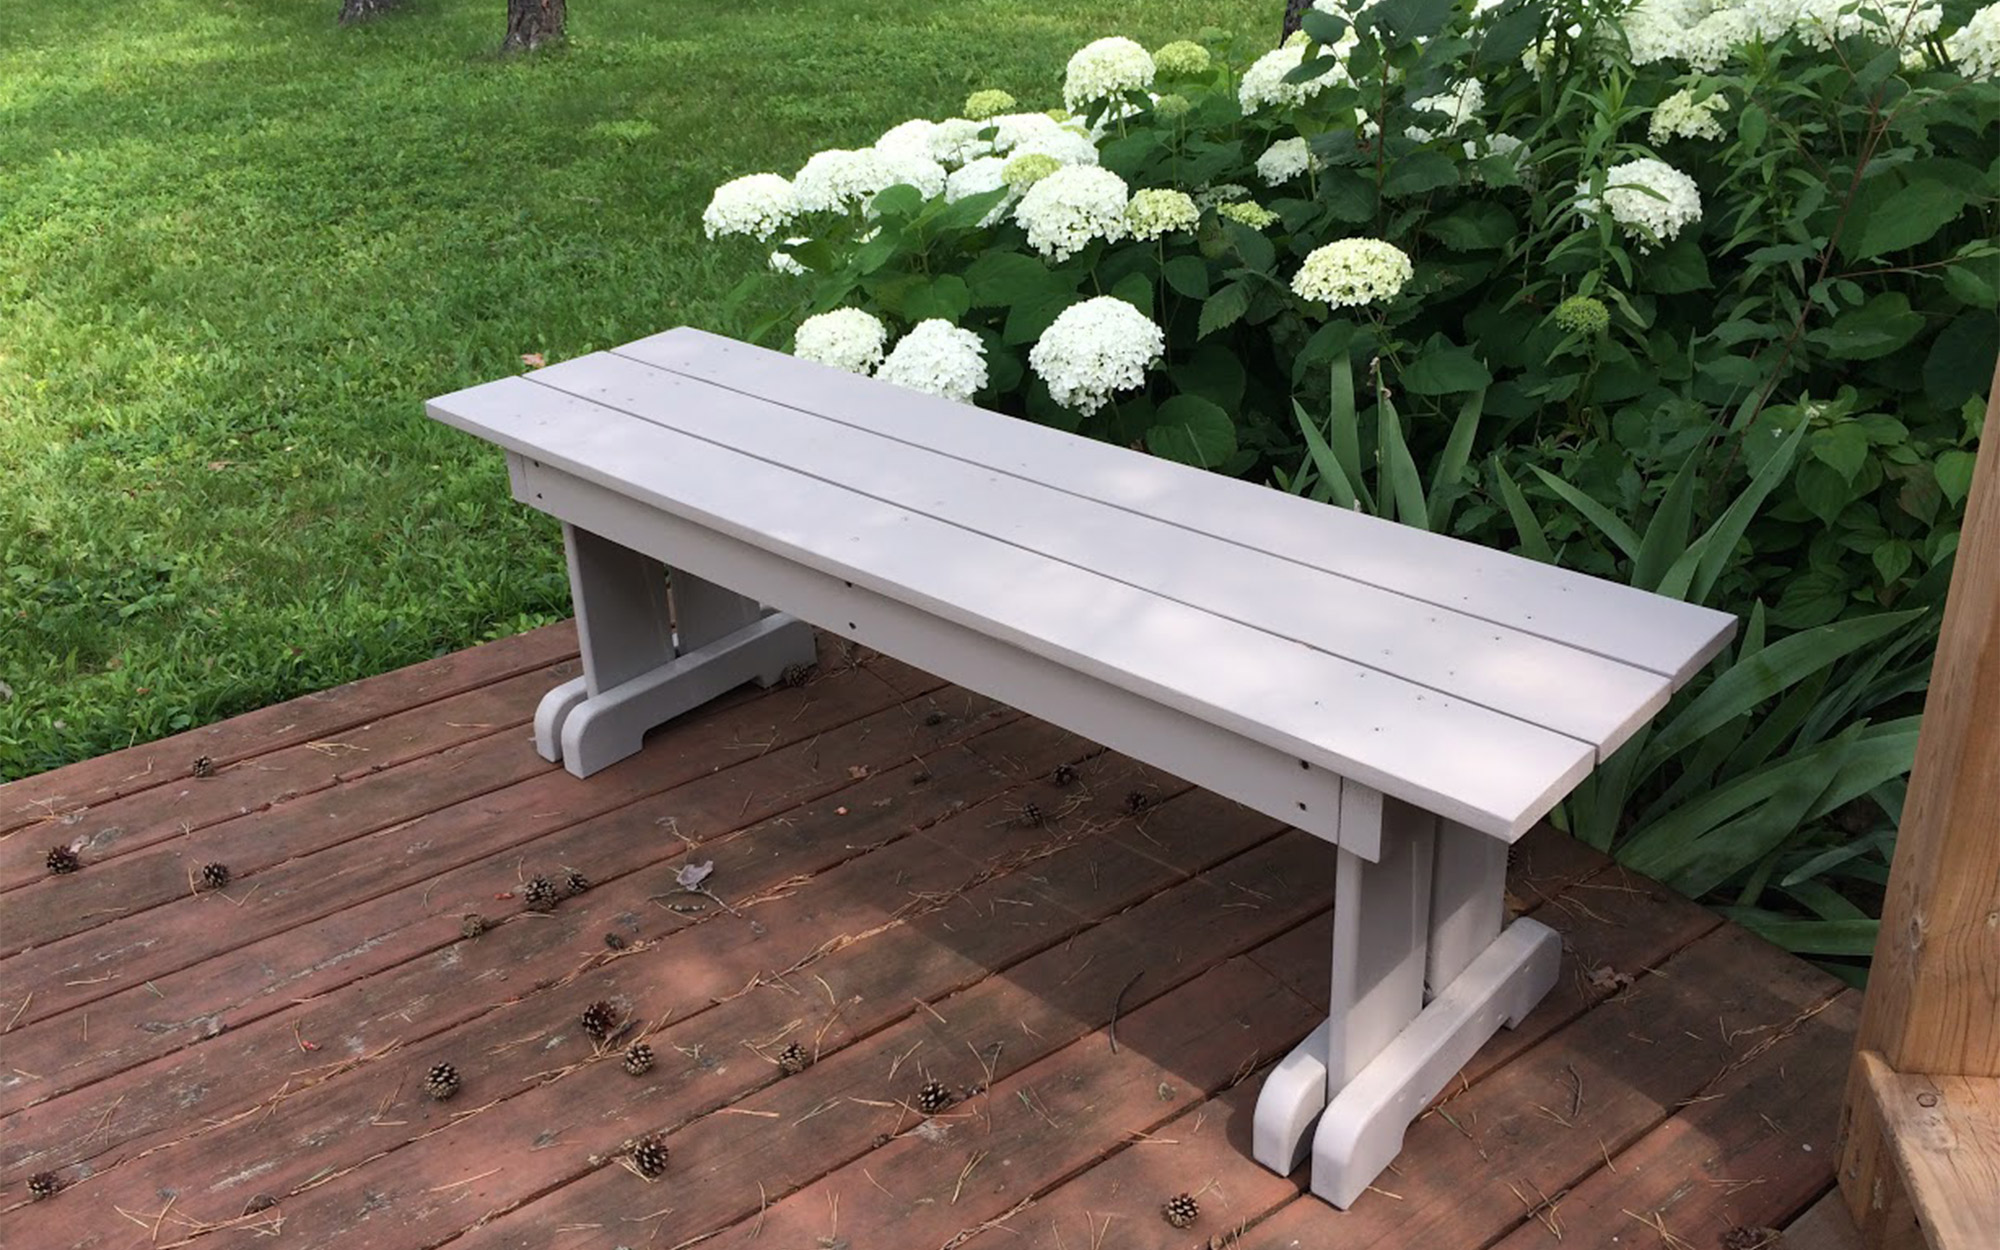 https://assetssc.leevalley.com/en-us/-/media/images/10_discover/woodworking/articles/easy-to-build-garden-bench/easy-build-garden-bench-9.jpg?la=en-us&revision=0e65e119-c9d9-4c56-9f13-30fe7a69967d&modified=20210427185510&hash=C447A1CC7F7972877CA619F3BEA0805EB79DFB4A